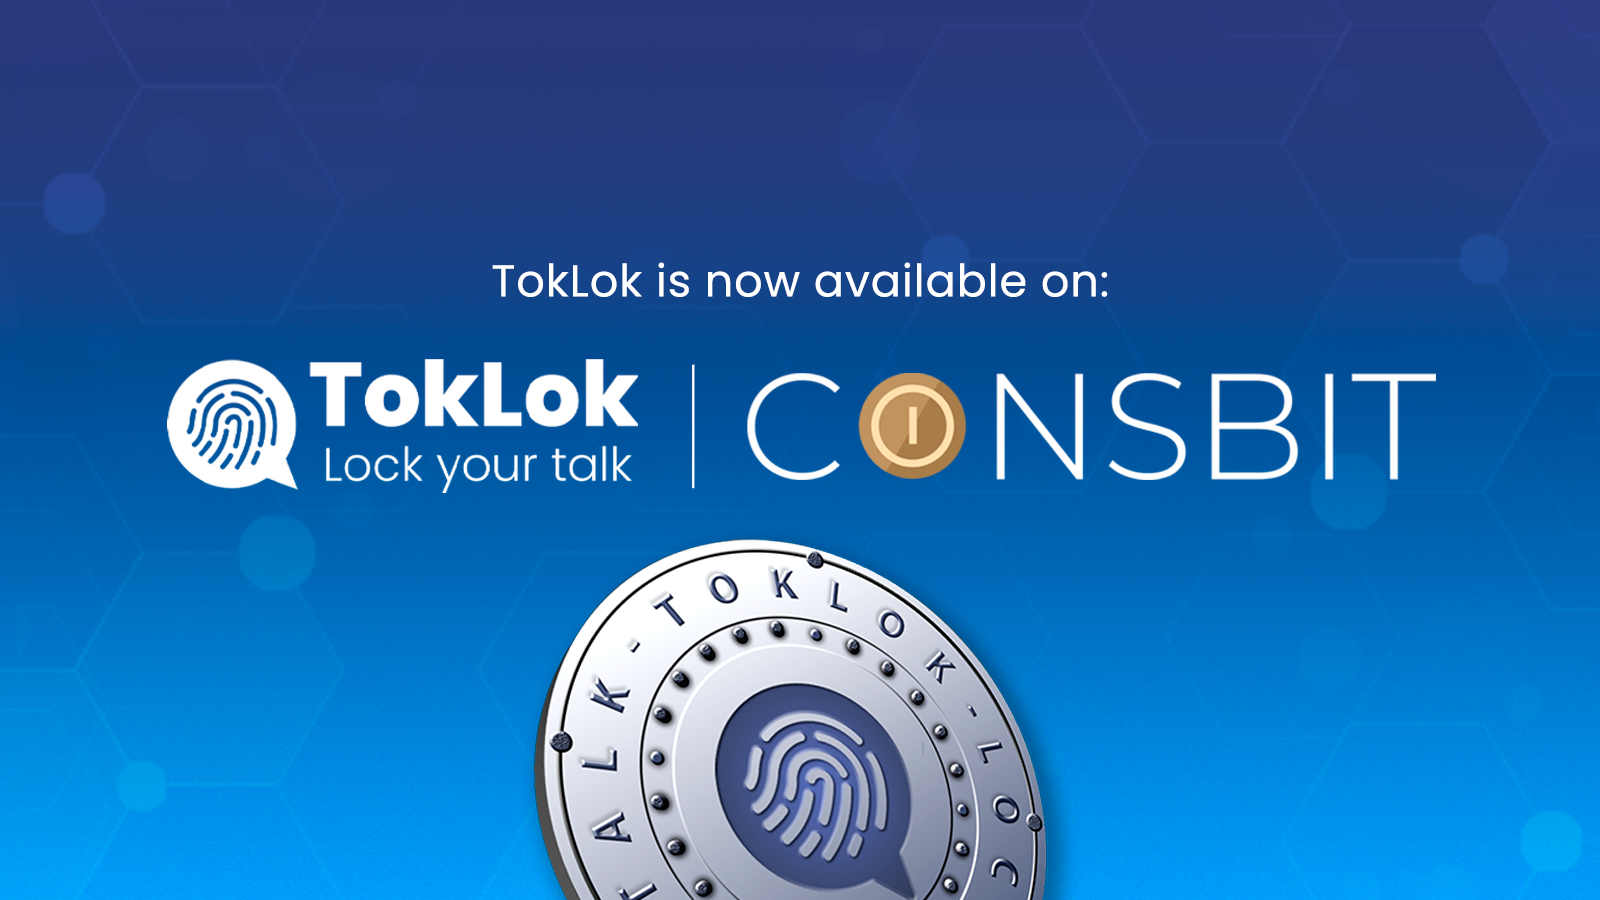 TokLok is now available on Coinsbit.